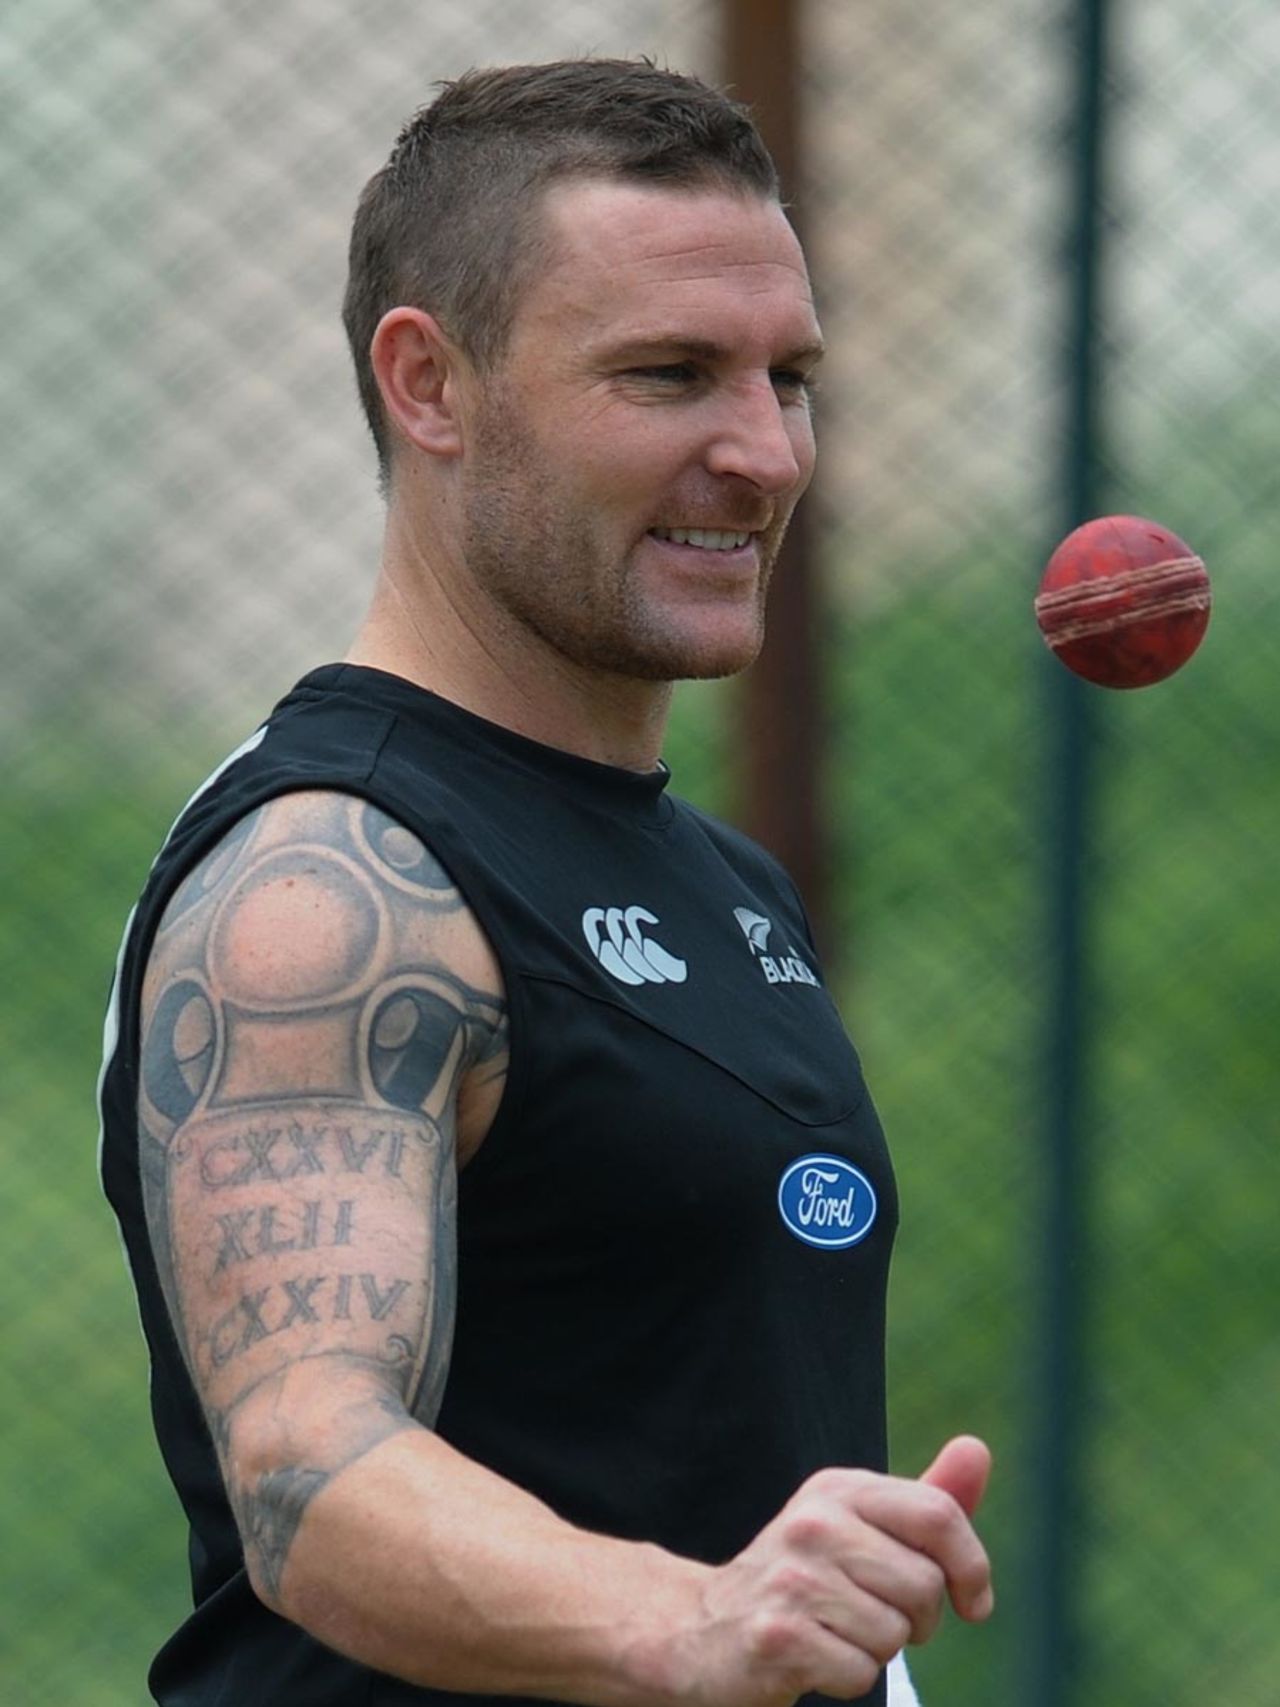 Brendon McCullum tosses the ball during a training session in Hyderabad, Hyderabad, August 20, 2012